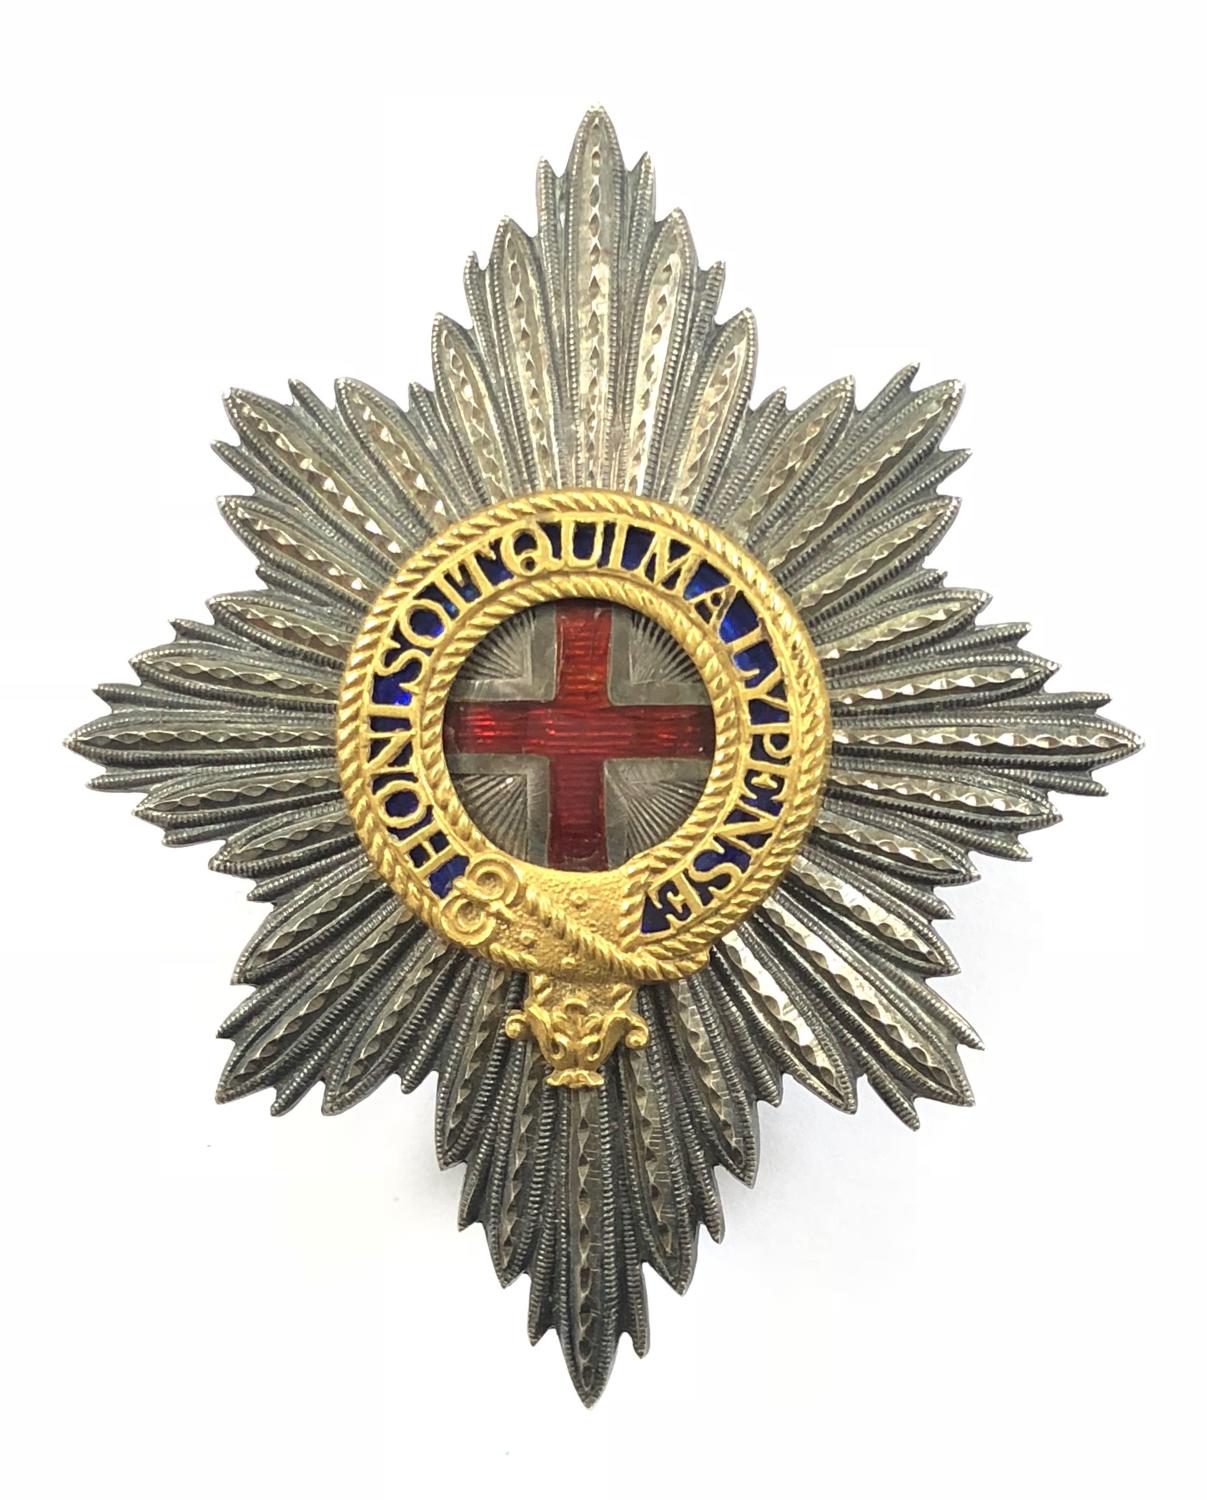 Coldstream Guards Officer’s Foreign Service helmet pagri badge